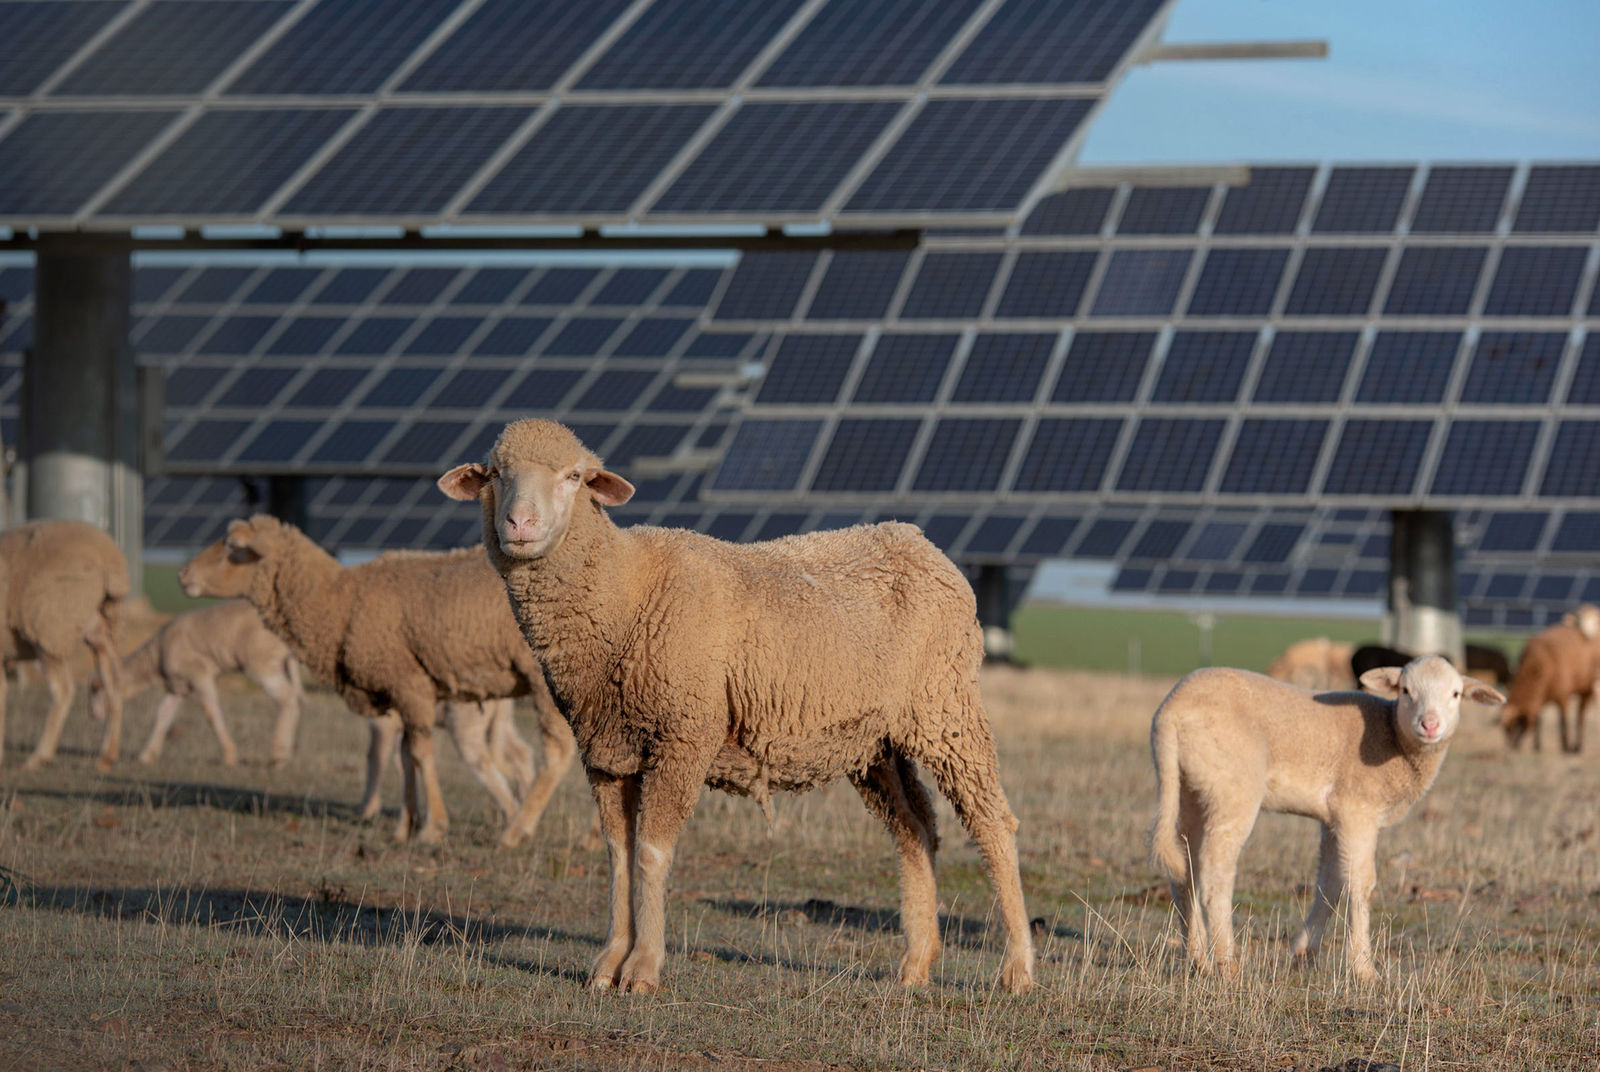 Sustainability at Volkswagen Chattanooga - 1 solar park and 50 animal mowers